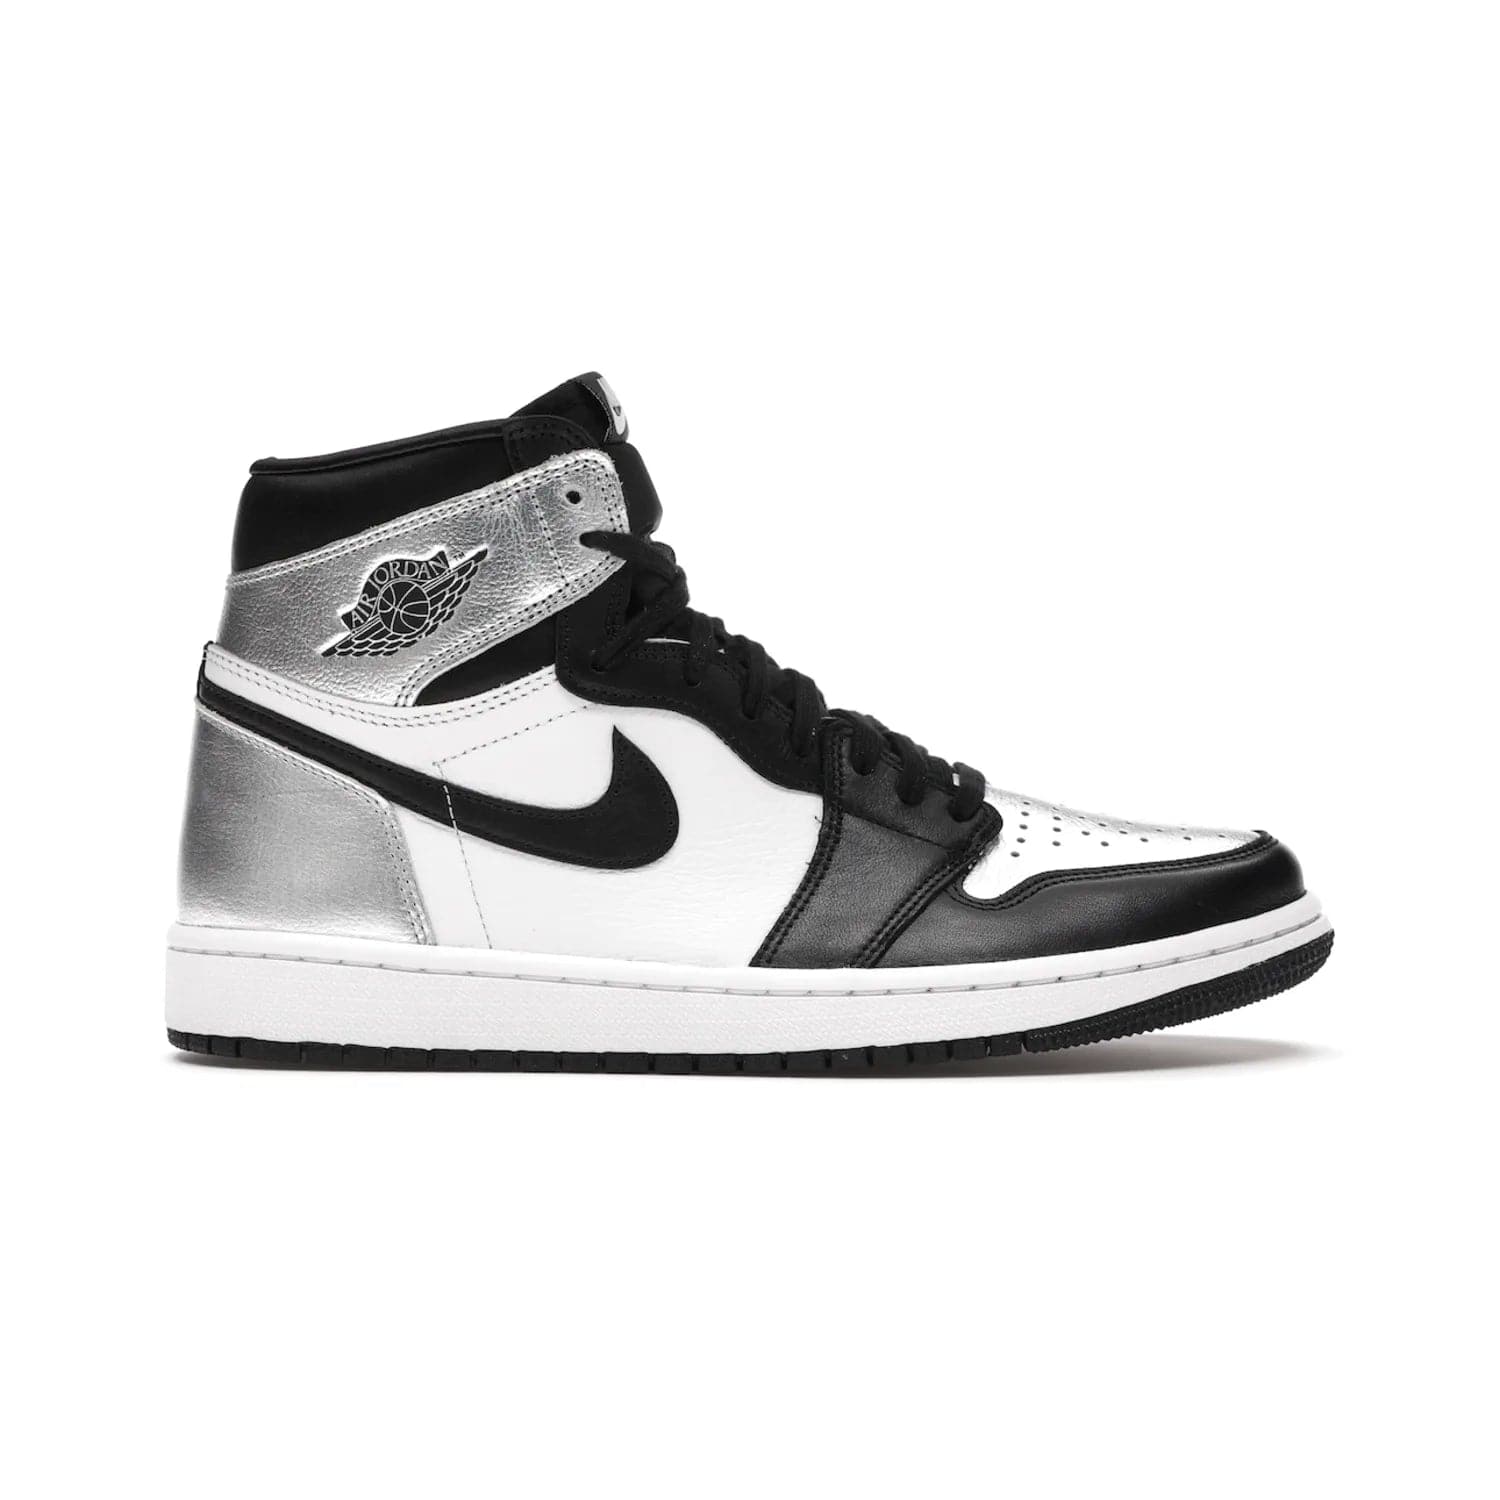 Jordan 1 Retro High Silver Toe (Women's) - Image 1 - Only at www.BallersClubKickz.com - Introducing the Jordan 1 Retro High Silver Toe (Women's): an updated spin on the iconic 'Black Toe' theme. Featuring white & black leather and silver patent leather construction. Nike Air branding, Air Jordan Wings logo, and white/black sole finish give a classic look. The perfect addition to an on-trend streetwear look. Available in classic black & white, this Jordan 1 is an instant classic. Released in February 202